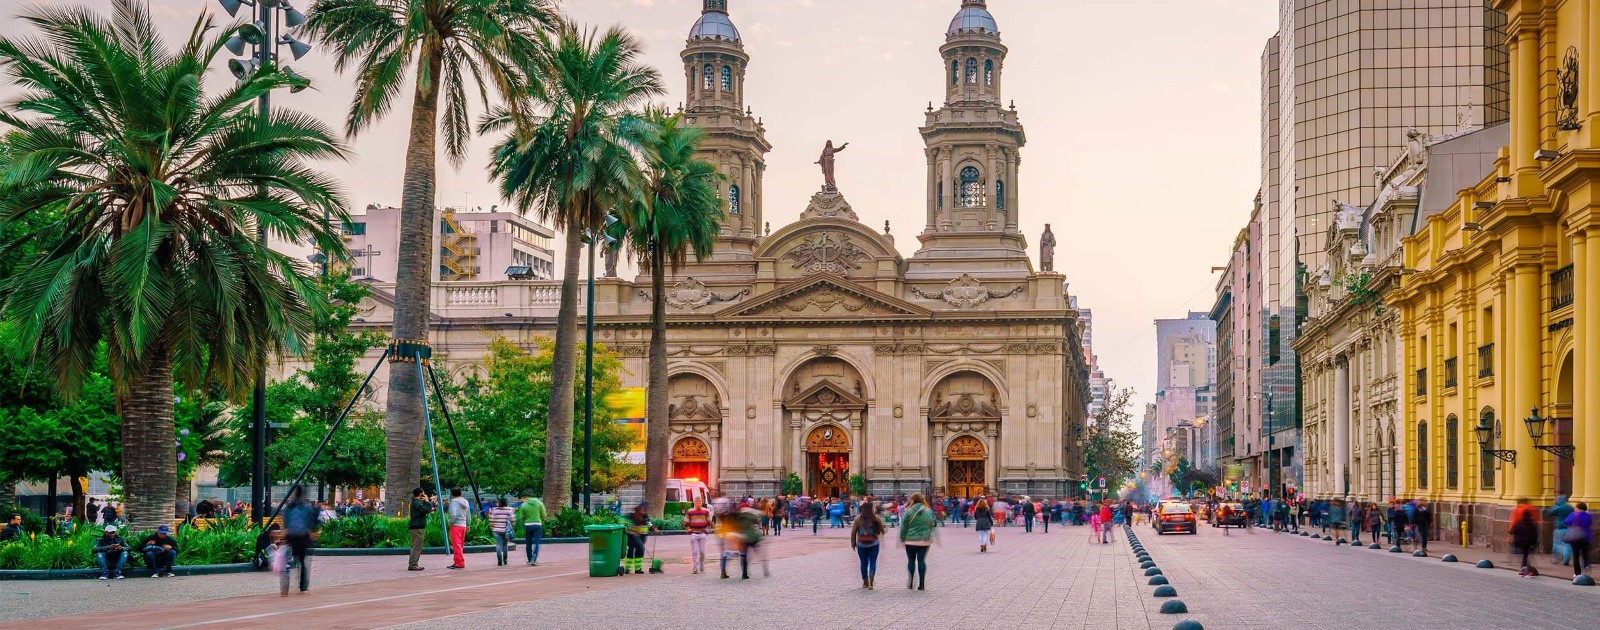 1-Day in Santiago de Chile | Things to Do | Hurtigruten Expeditions